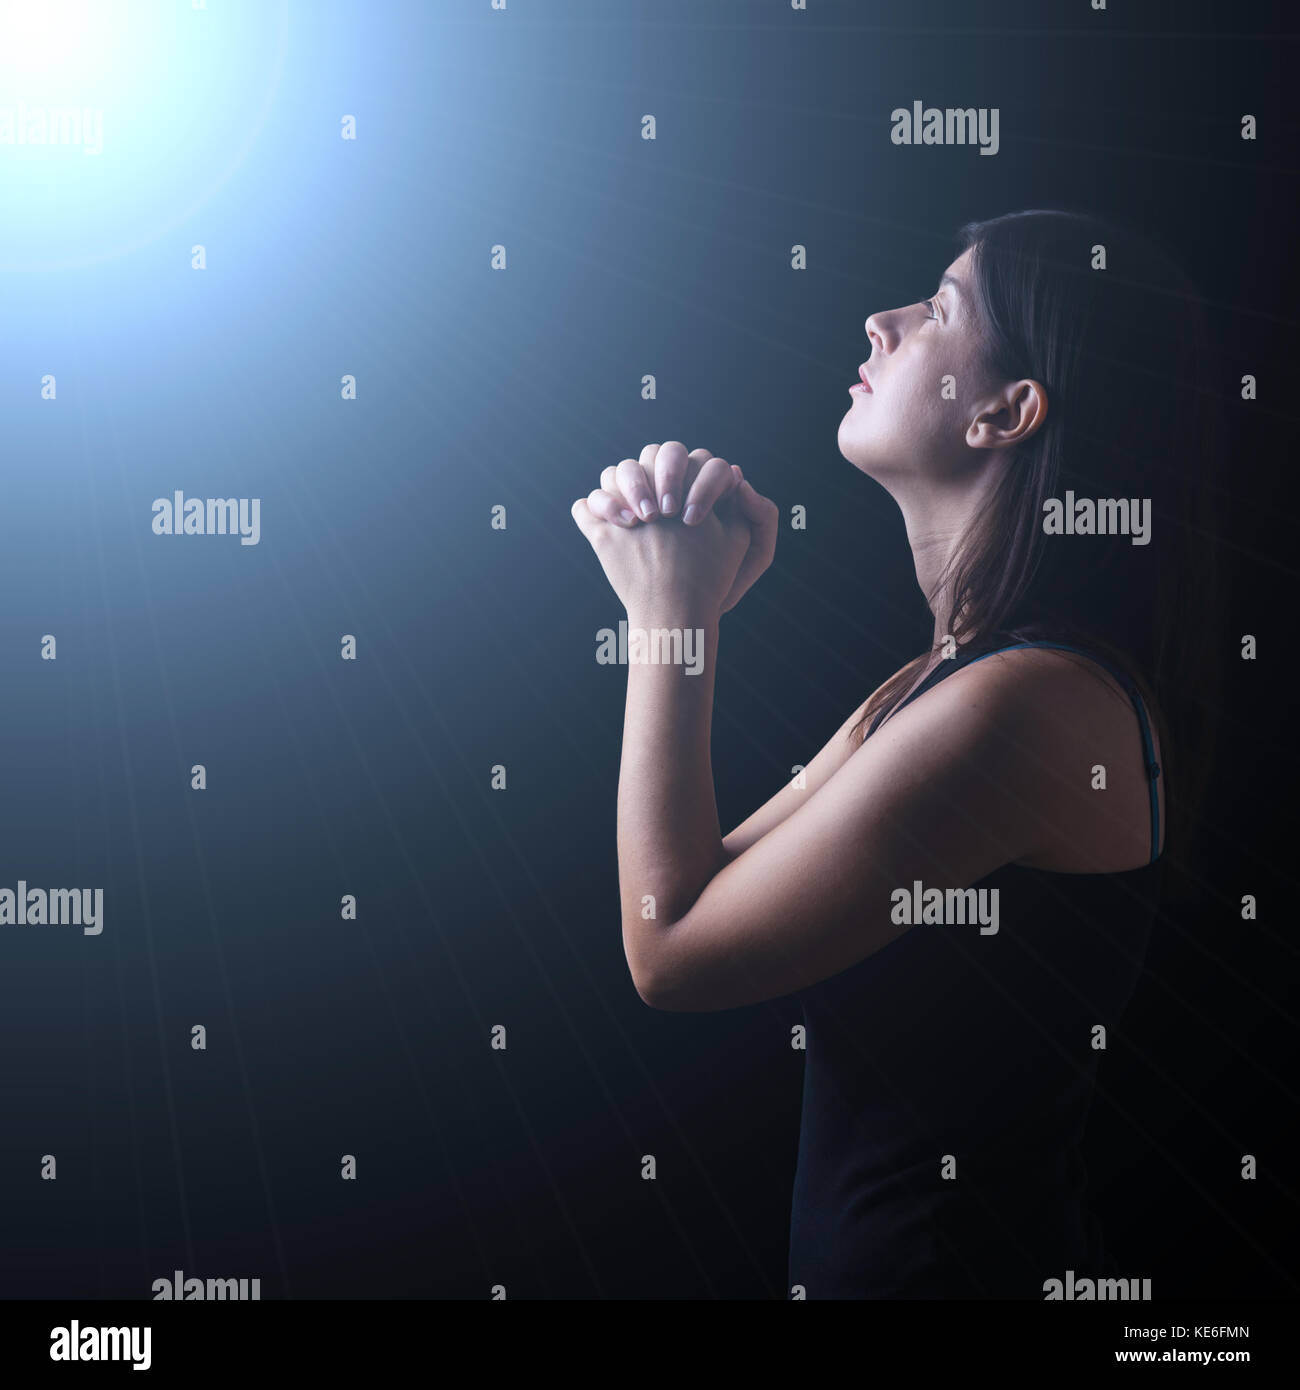 Faithful woman praying in worship to god looking up in hope, under a divine or celestial light. faith prayer spirituality prayer heavenly iluminated Stock Photo